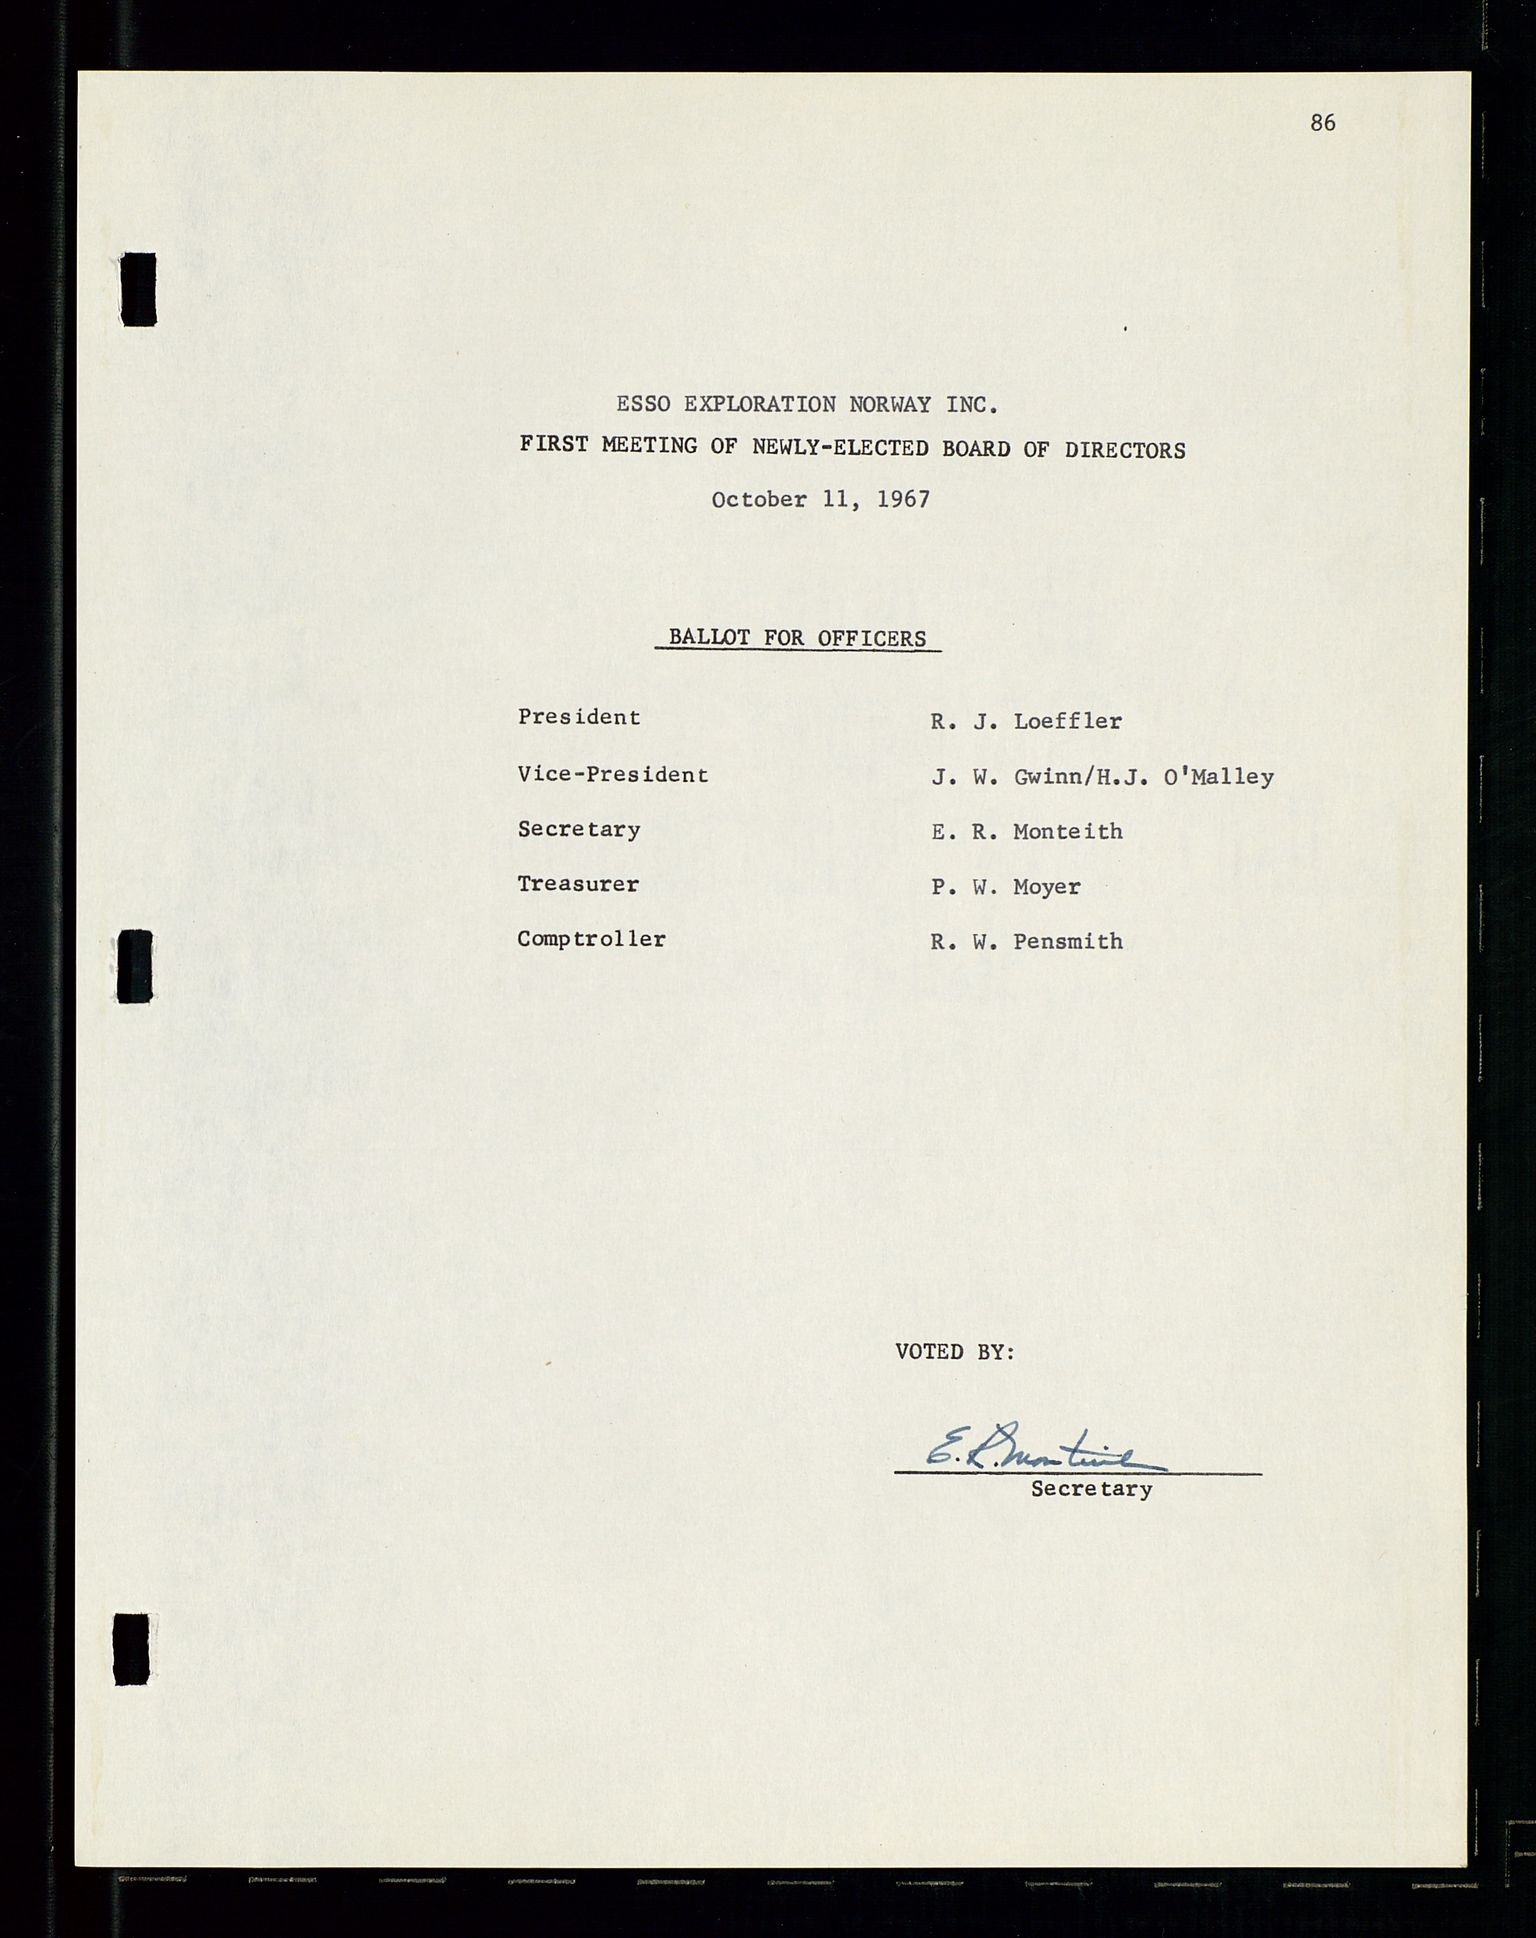 Pa 1512 - Esso Exploration and Production Norway Inc., SAST/A-101917/A/Aa/L0001/0001: Styredokumenter / Corporate records, By-Laws, Board meeting minutes, Incorporations, 1965-1975, s. 86